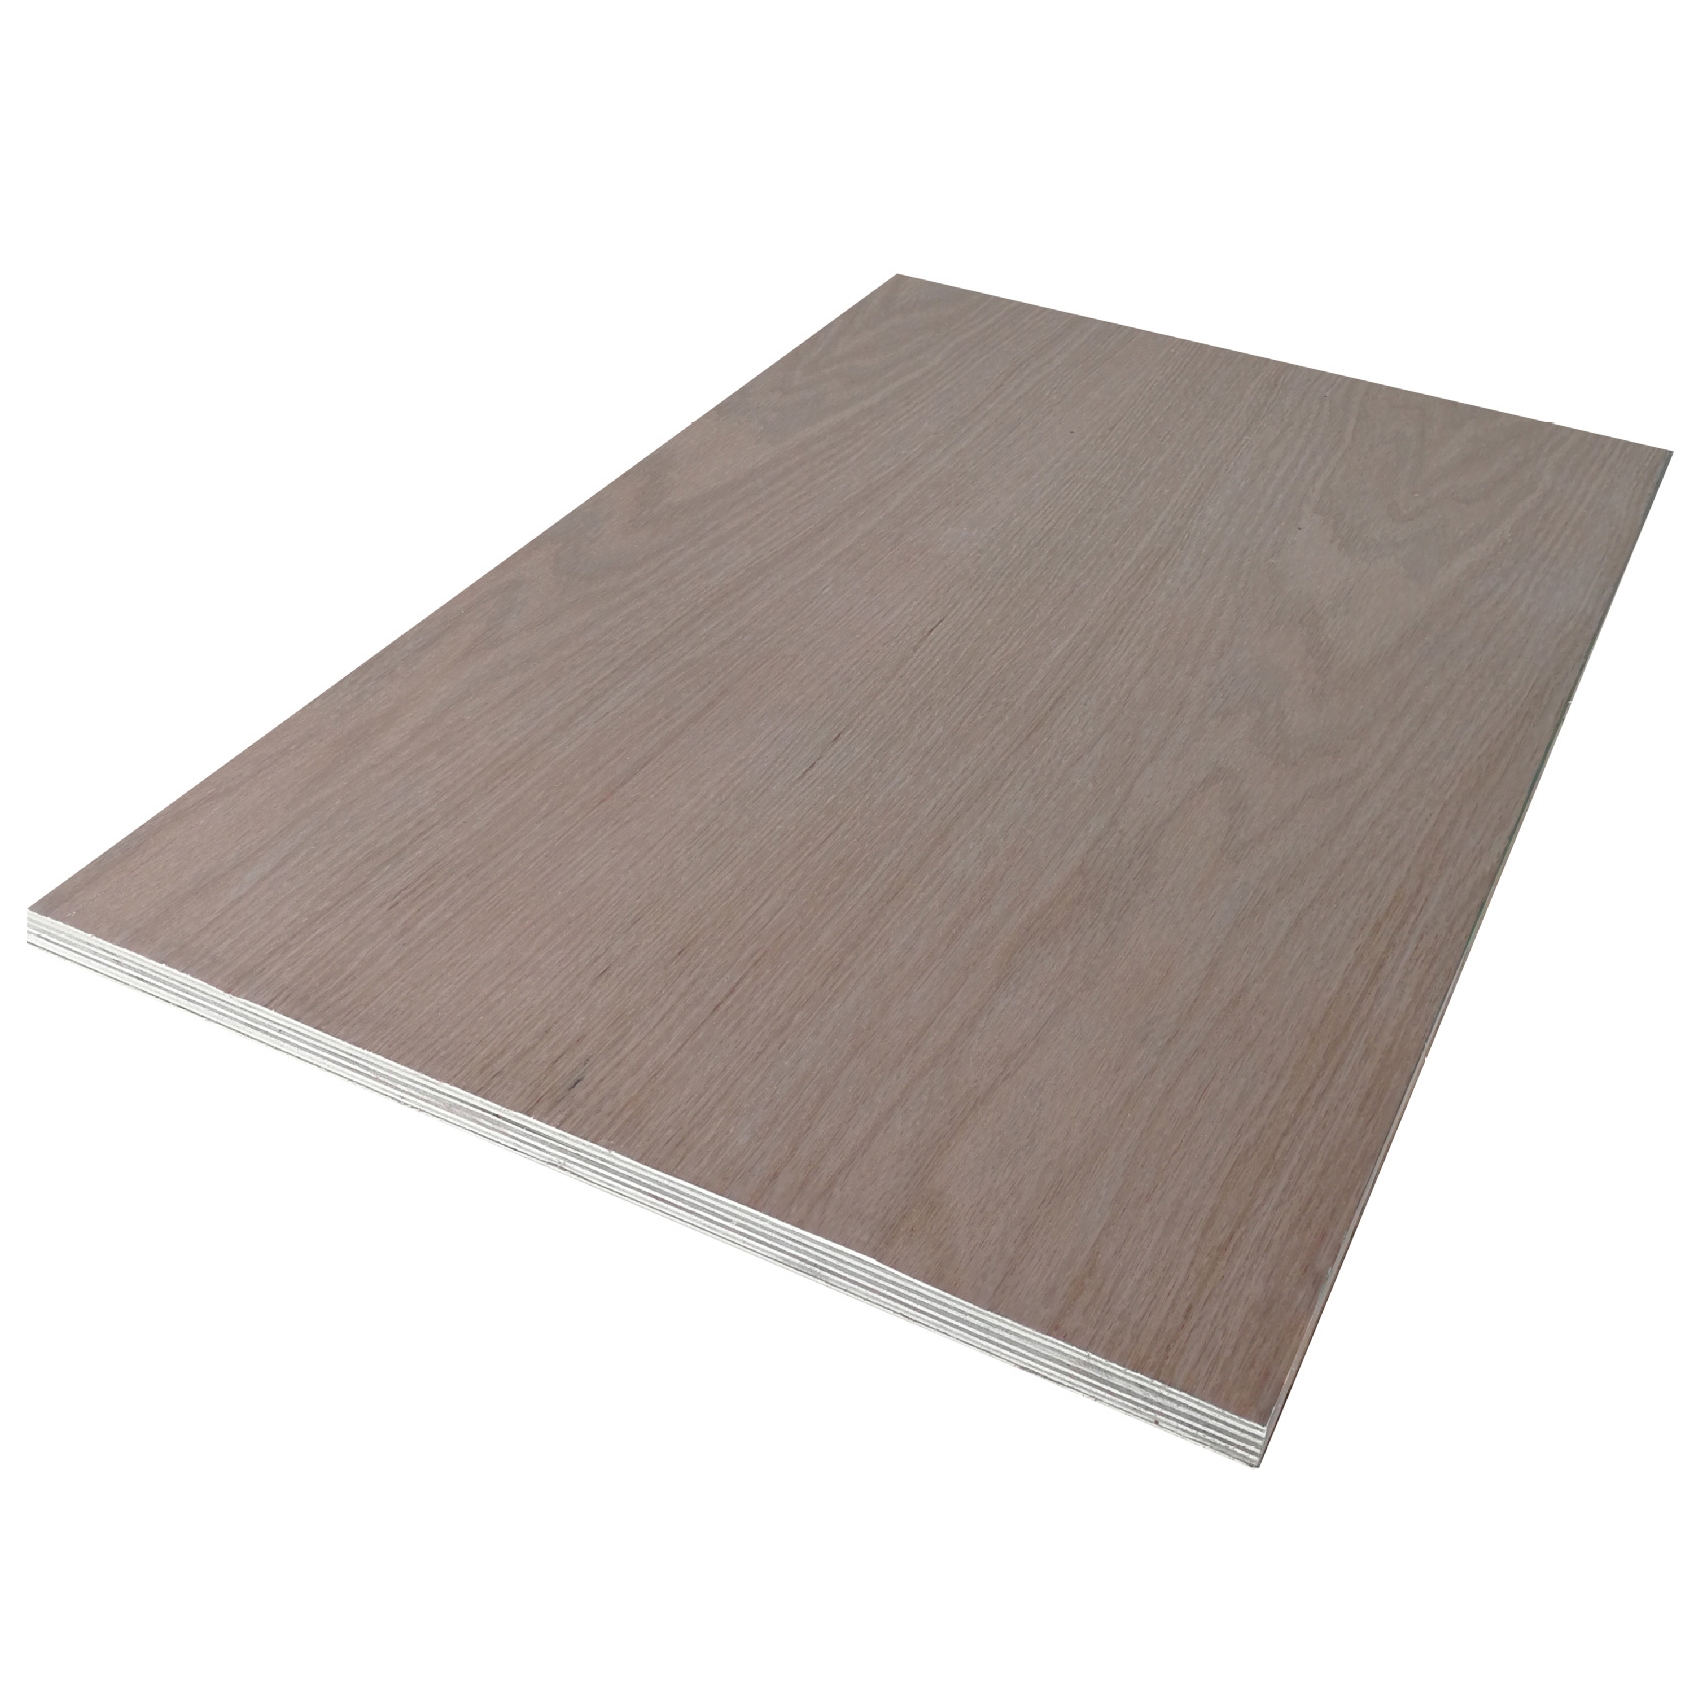 Dongstar 2-27mm High Quality Plywood Sheet (9)